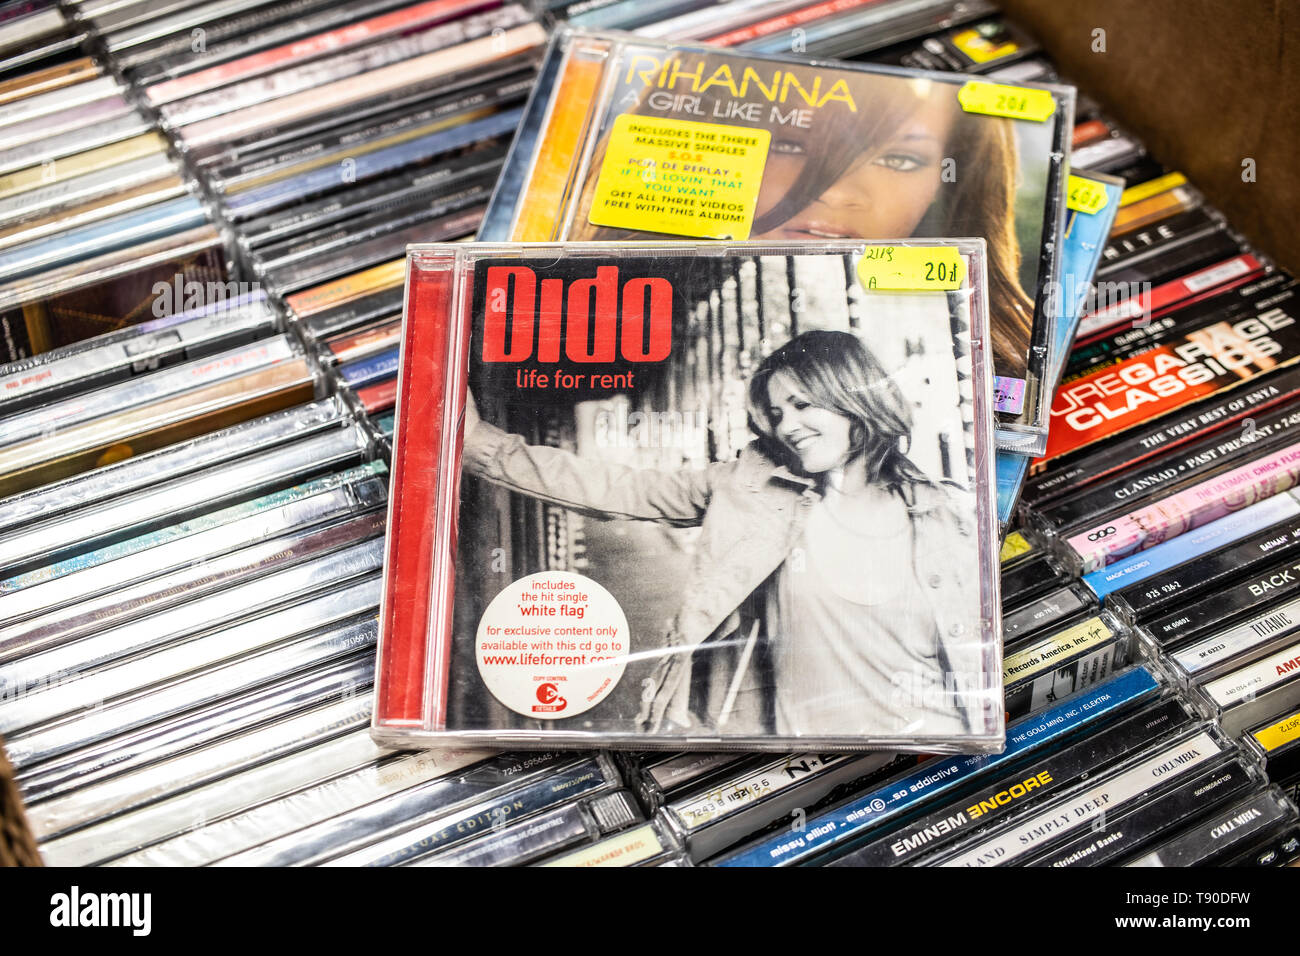 Nadarzyn, Poland, May 11, 2019: Dido CD album Life for Rent 2003 on display for sale, famous English singer and songwriter, collection of CD music alb Stock Photo